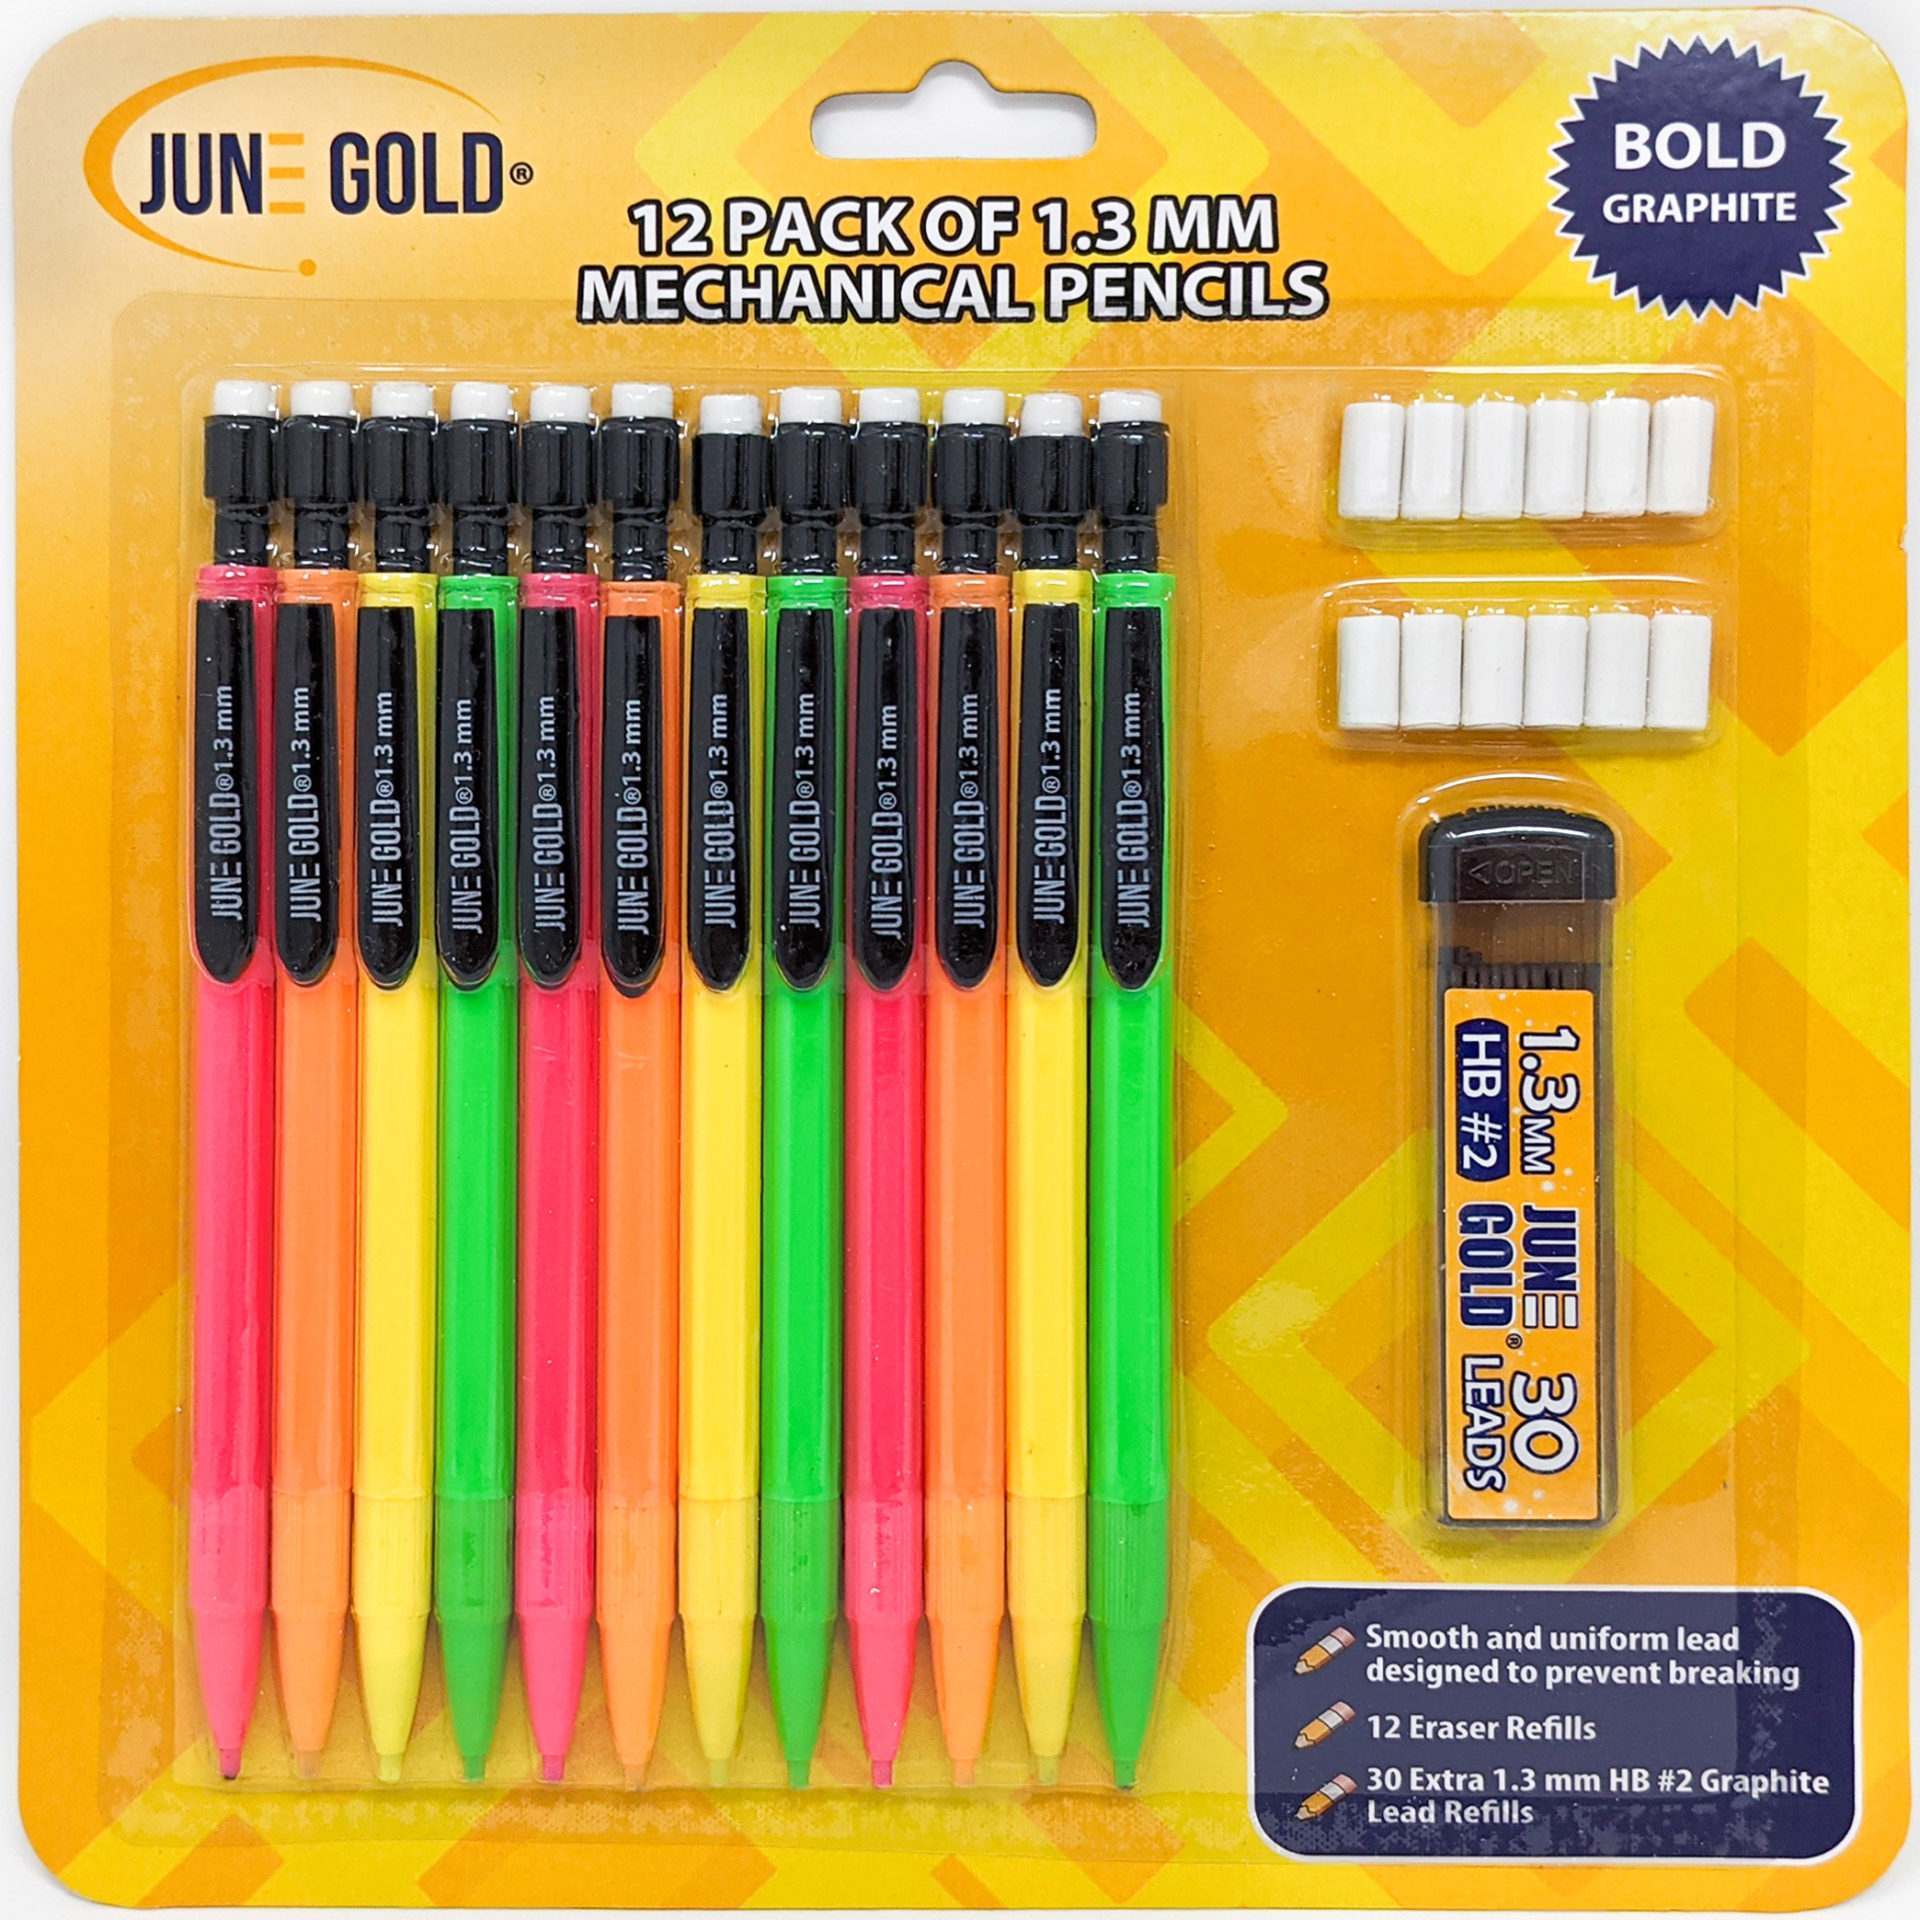 36 Pack of 2.0 mm Assorted Colored Mechanical Pencils – June Gold